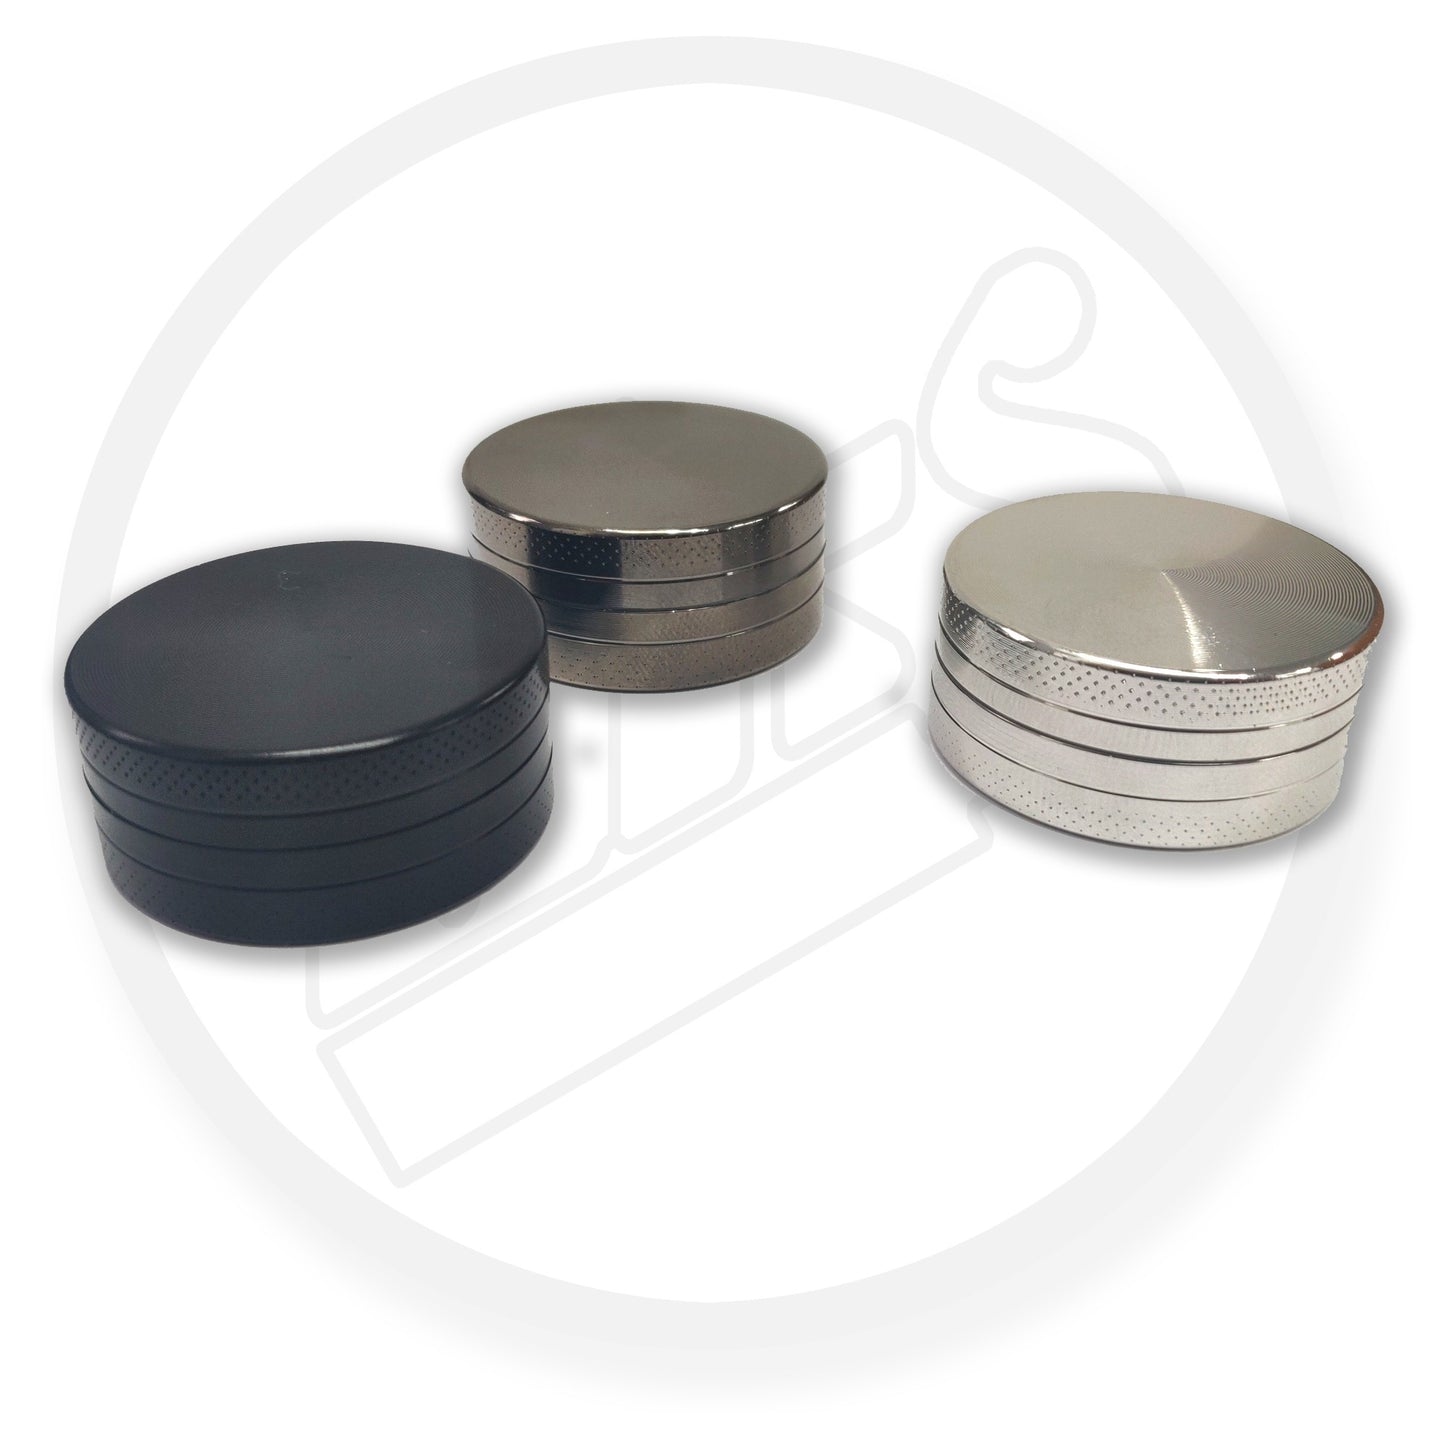 Grinder - 2pc Metal, Magnetic with Metallic Finish, 40mm